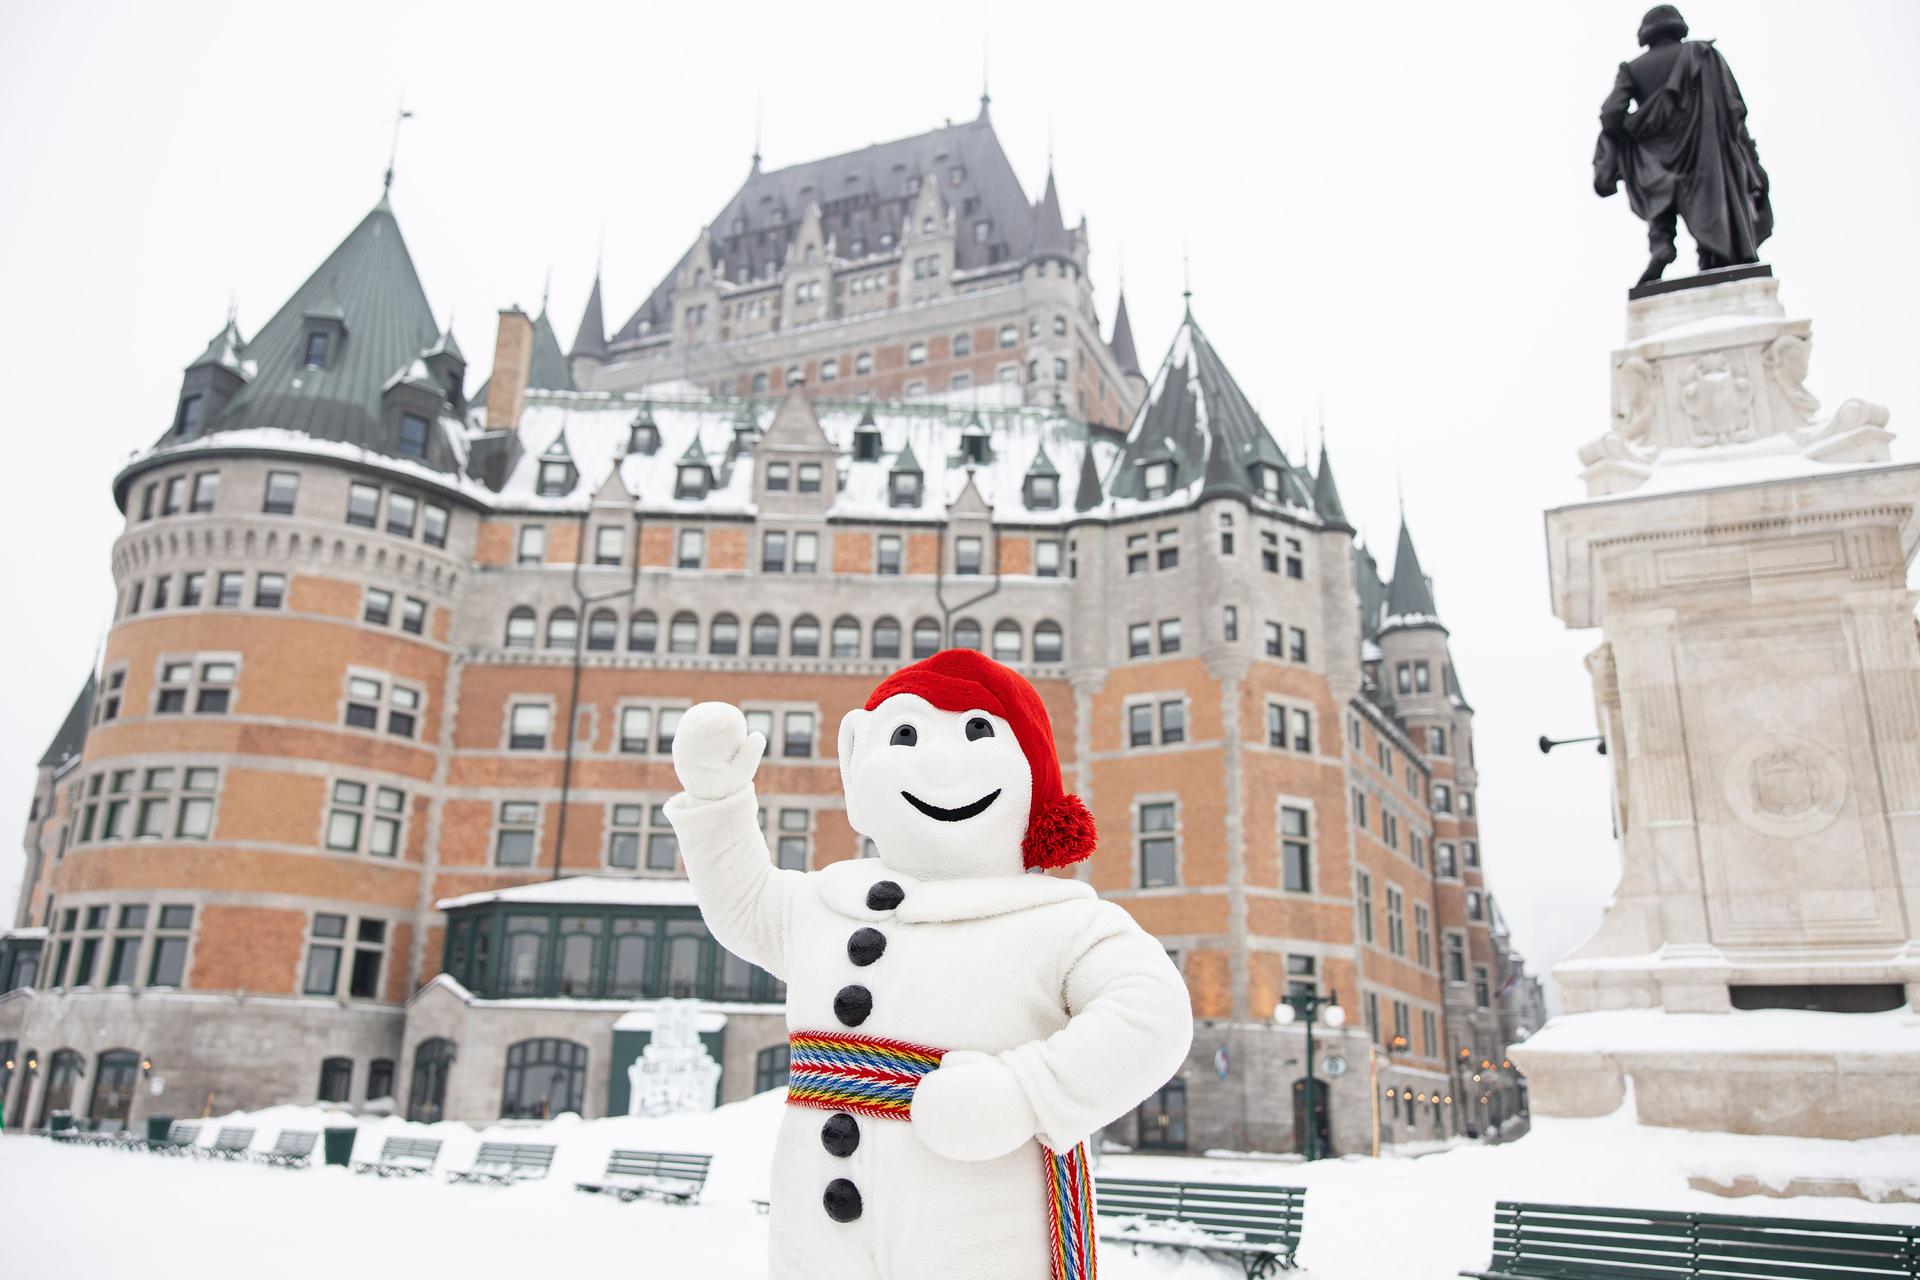 Bonhomme at the famous Quebec Winter Carnaval